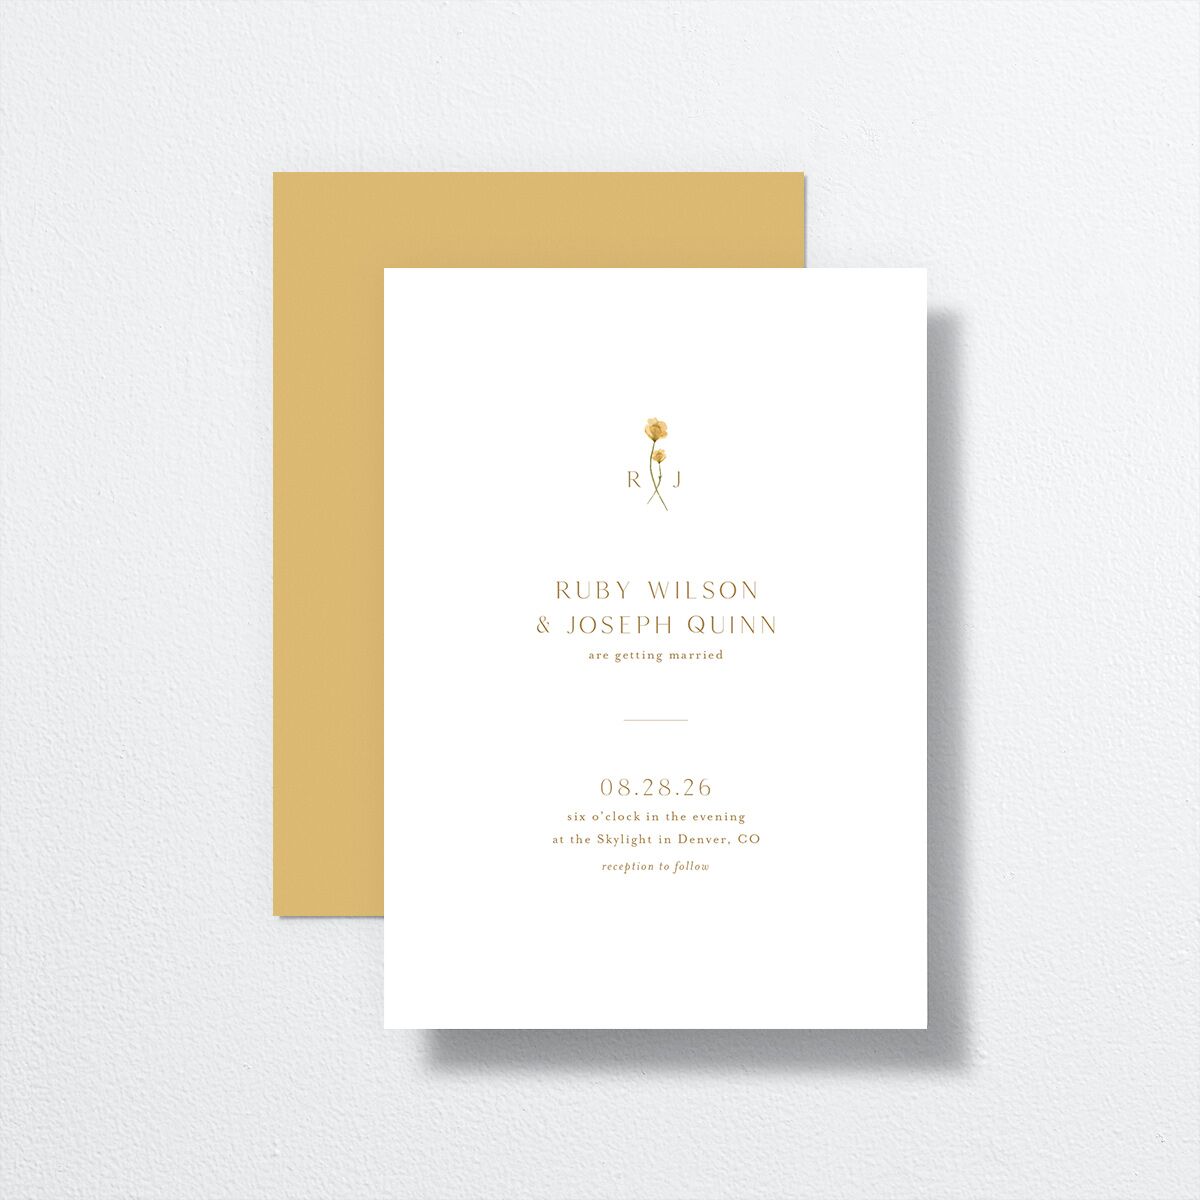 Dainty Monogram Wedding Invitations front-and-back in yellow